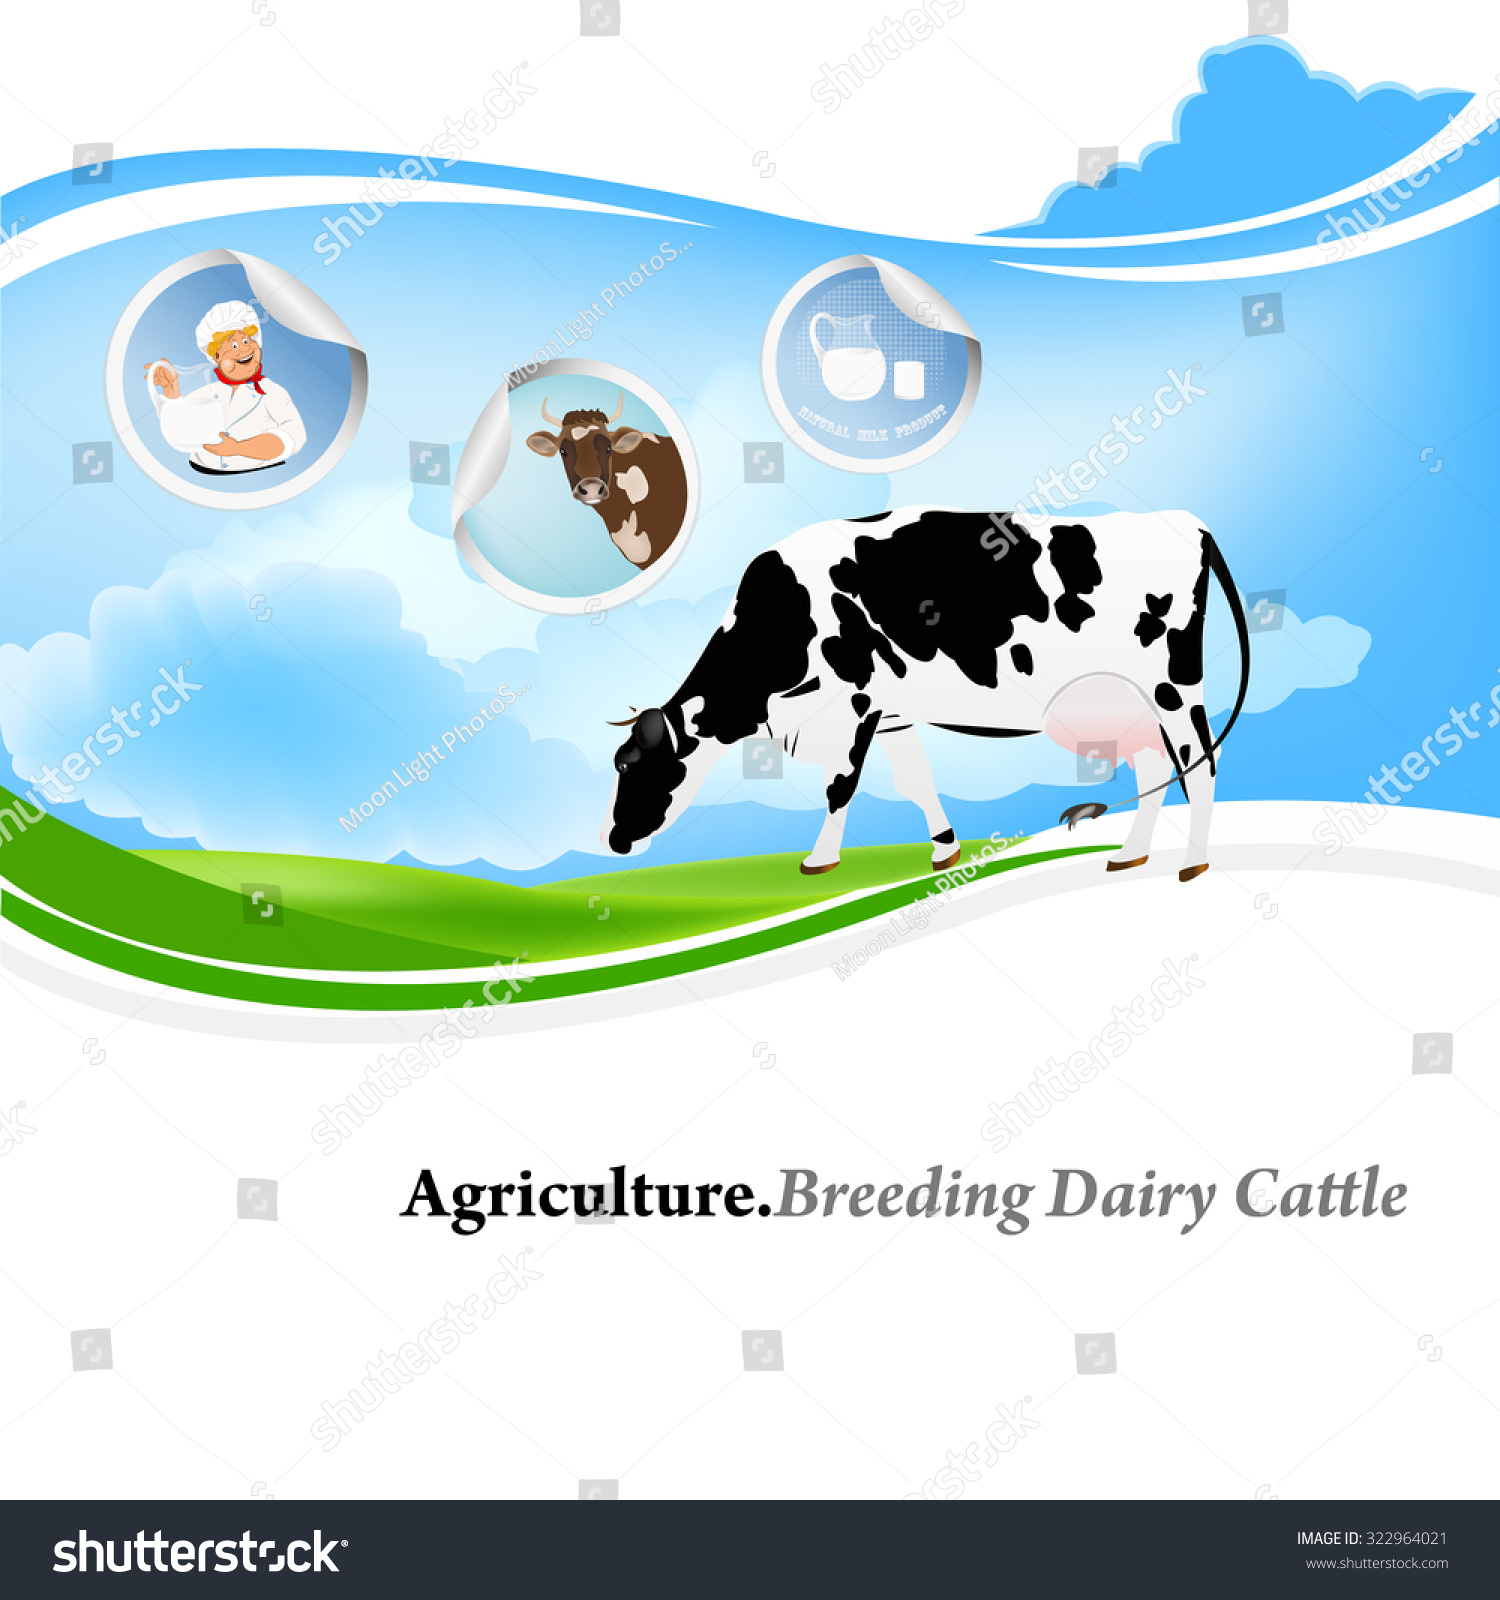 Breeding Dairy Cattleagriculturevector Background Label Stock